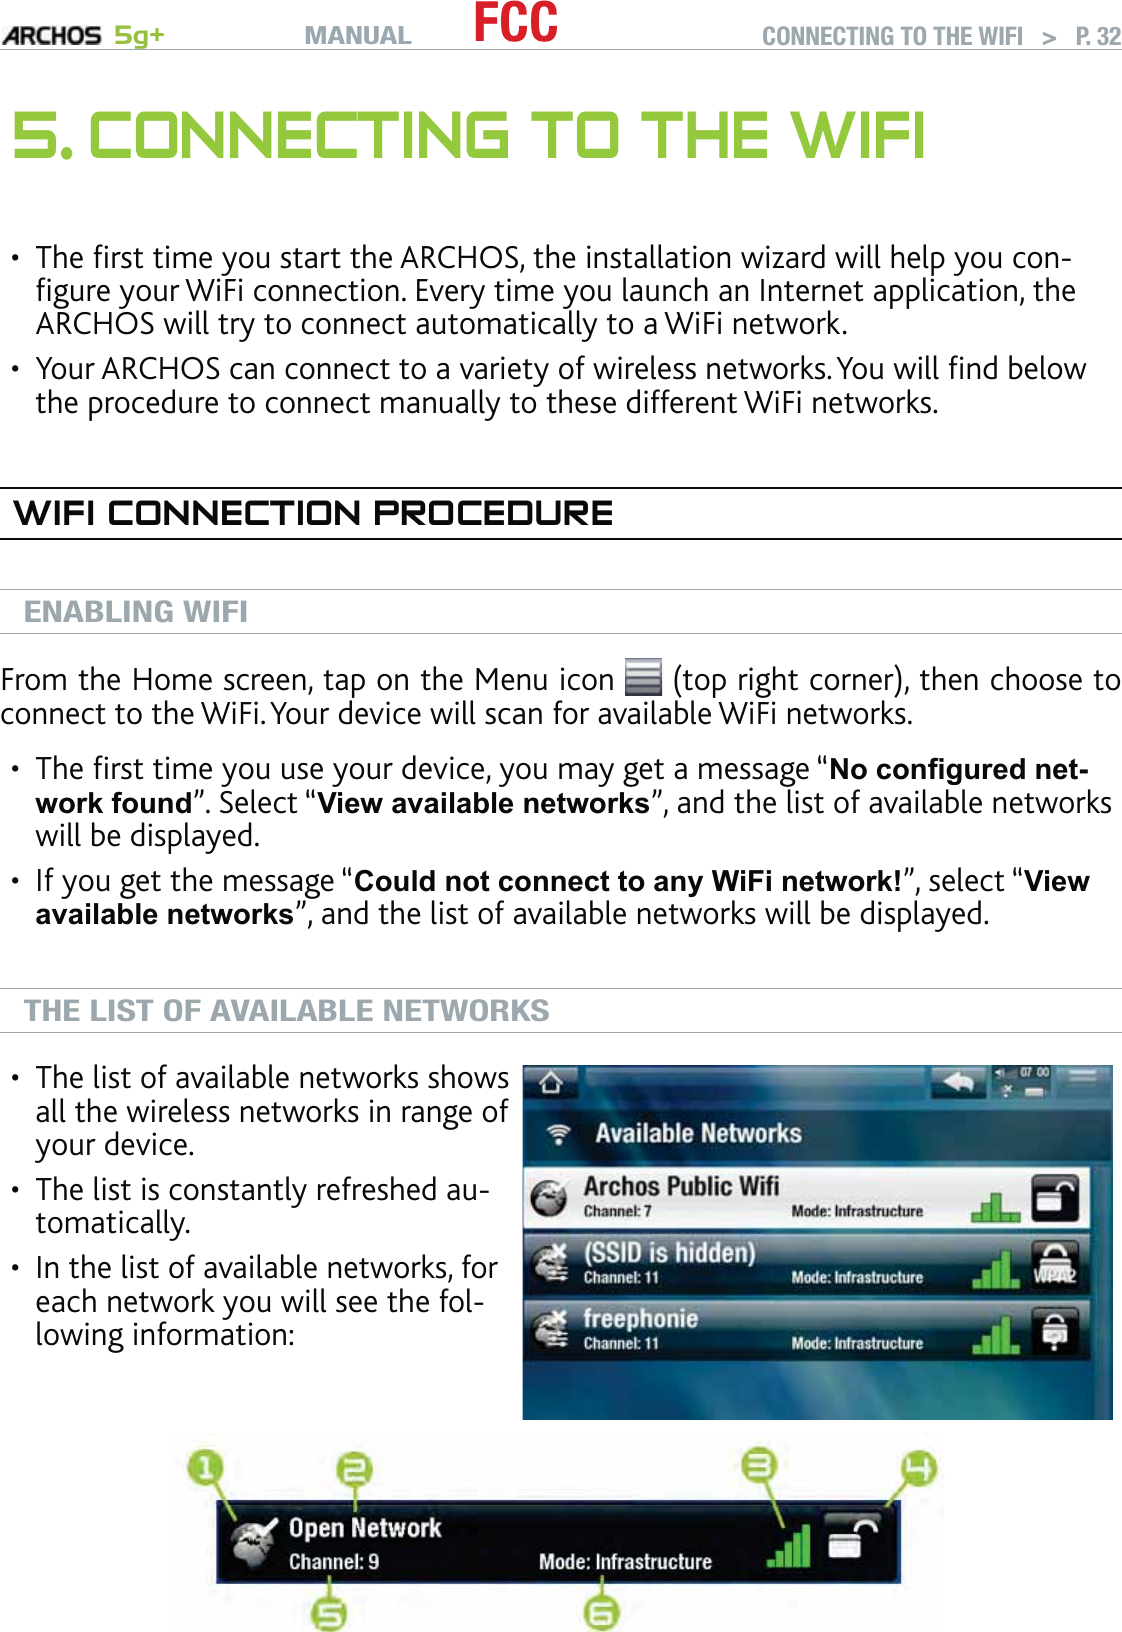 MANUAL 5g+ FCC CONNECTING TO THE WIFI   &gt;   P. 325. CONNECTING TO THE WIFIThe ﬁrst time you start the ARCHOS, the installation wizard will help you con-ﬁgure your WiFi connection. Every time you launch an Internet application, the ARCHOS will try to connect automatically to a WiFi network.Your ARCHOS can connect to a variety of wireless networks. You will ﬁnd below the procedure to connect manually to these different WiFi networks.WIFI CONNECTION PROCEDUREENABLING WIFIFrom the Home screen, tap on the Menu icon   (top right corner), then choose to connect to the WiFi. Your device will scan for available WiFi networks.The ﬁrst time you use your device, you may get a message “No conﬁgured net-work found”. Select “View available networks”, and the list of available networks will be displayed.If you get the message “Could not connect to any WiFi network!”, select “View available networks”, and the list of available networks will be displayed.THE LIST OF AVAILABLE NETWORKSThe list of available networks shows all the wireless networks in range of your device.The list is constantly refreshed au-tomatically.In the list of available networks, for each network you will see the fol-lowing information:•••••••